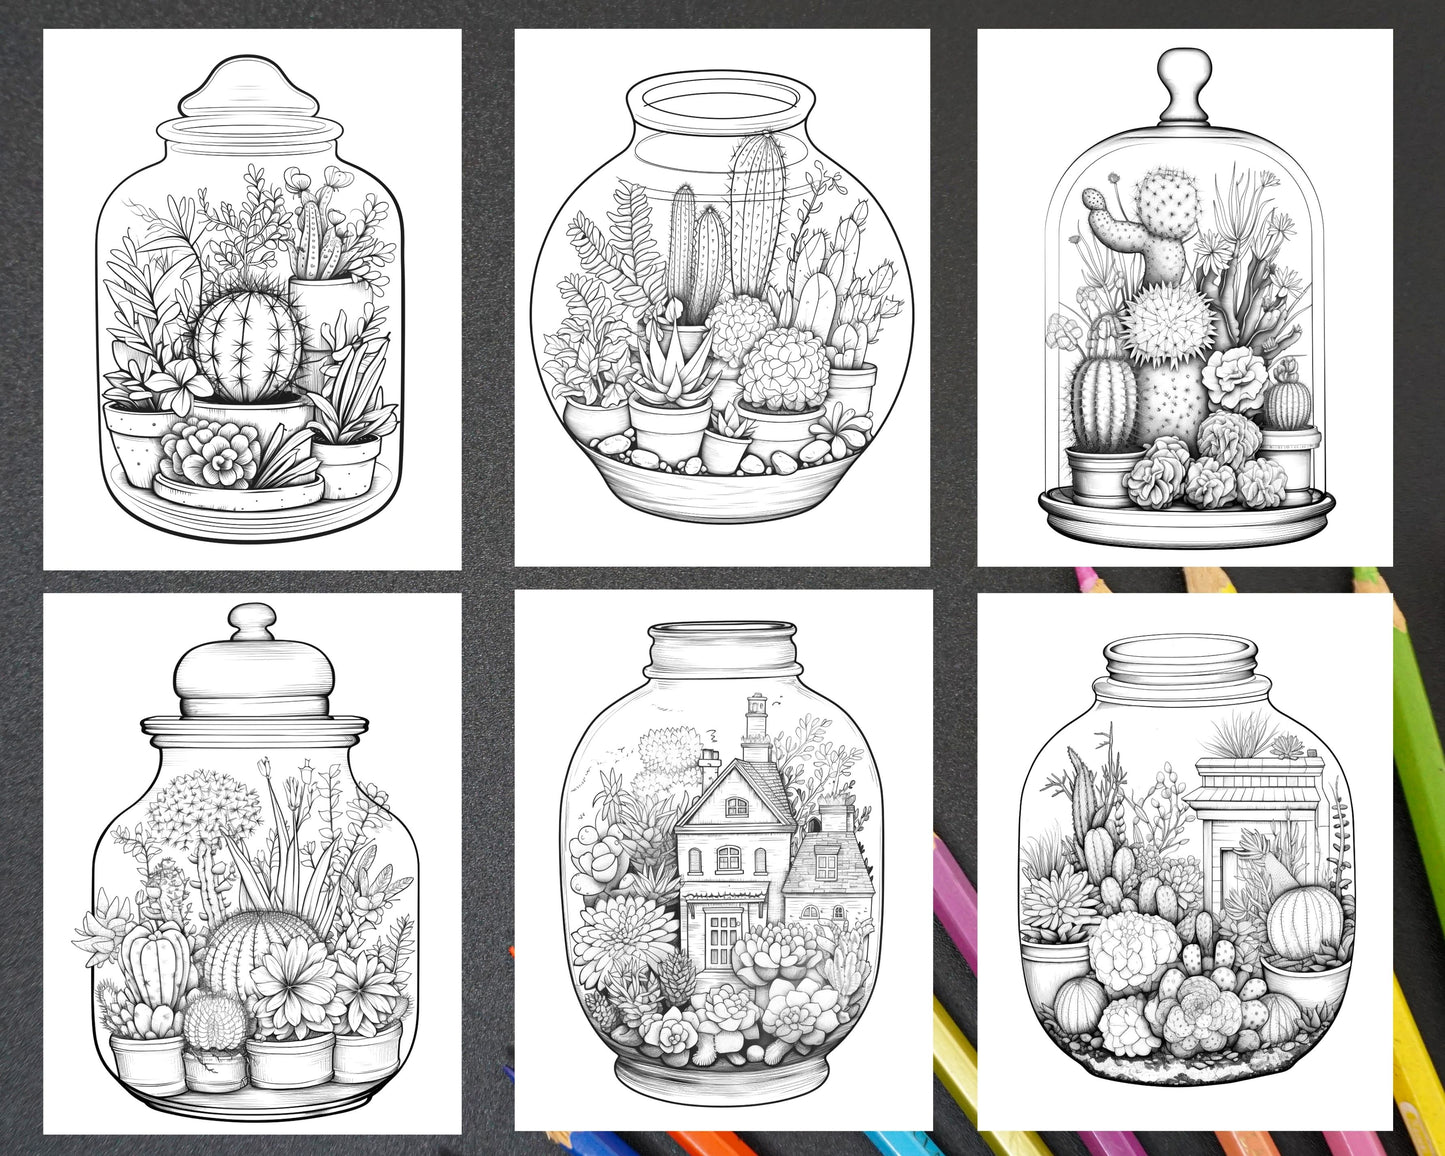 Enchanted Terrarium Coloring Pages for Adults, Printable Art for Stress Relief, Nature Designs for Coloring, Relaxing Adult Coloring Book